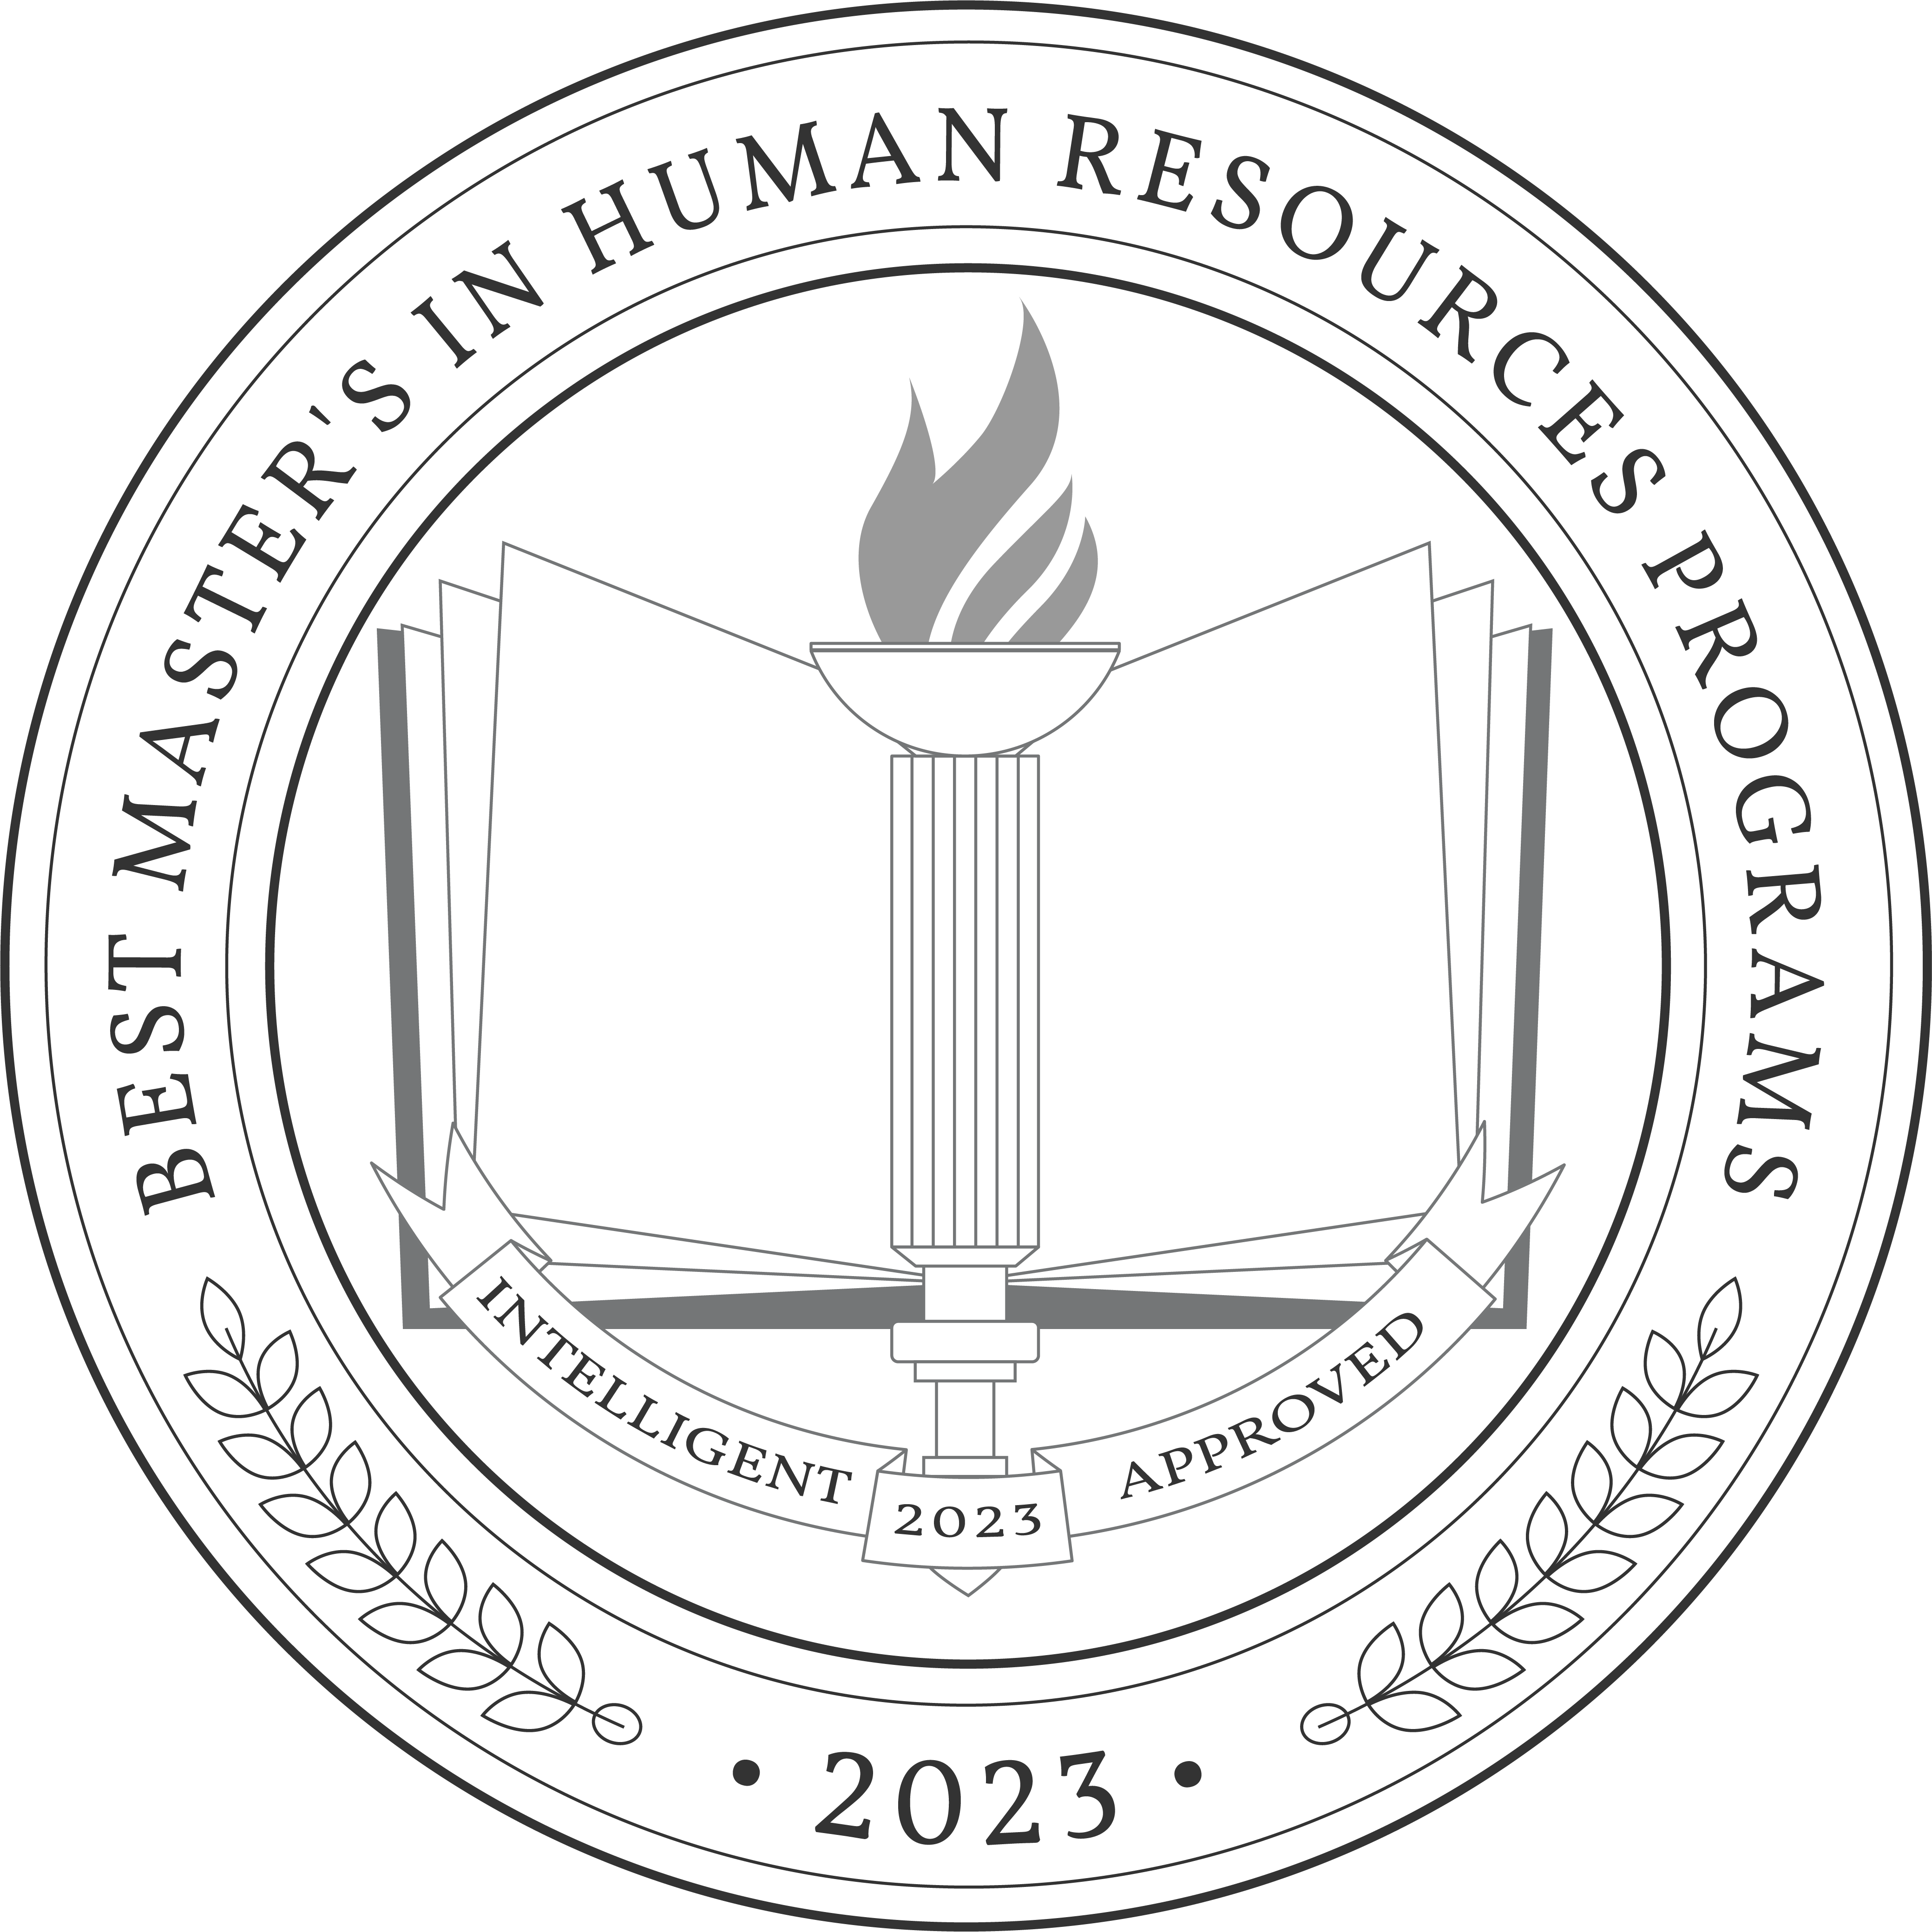 Best Master's in Human Resources Programs 2023